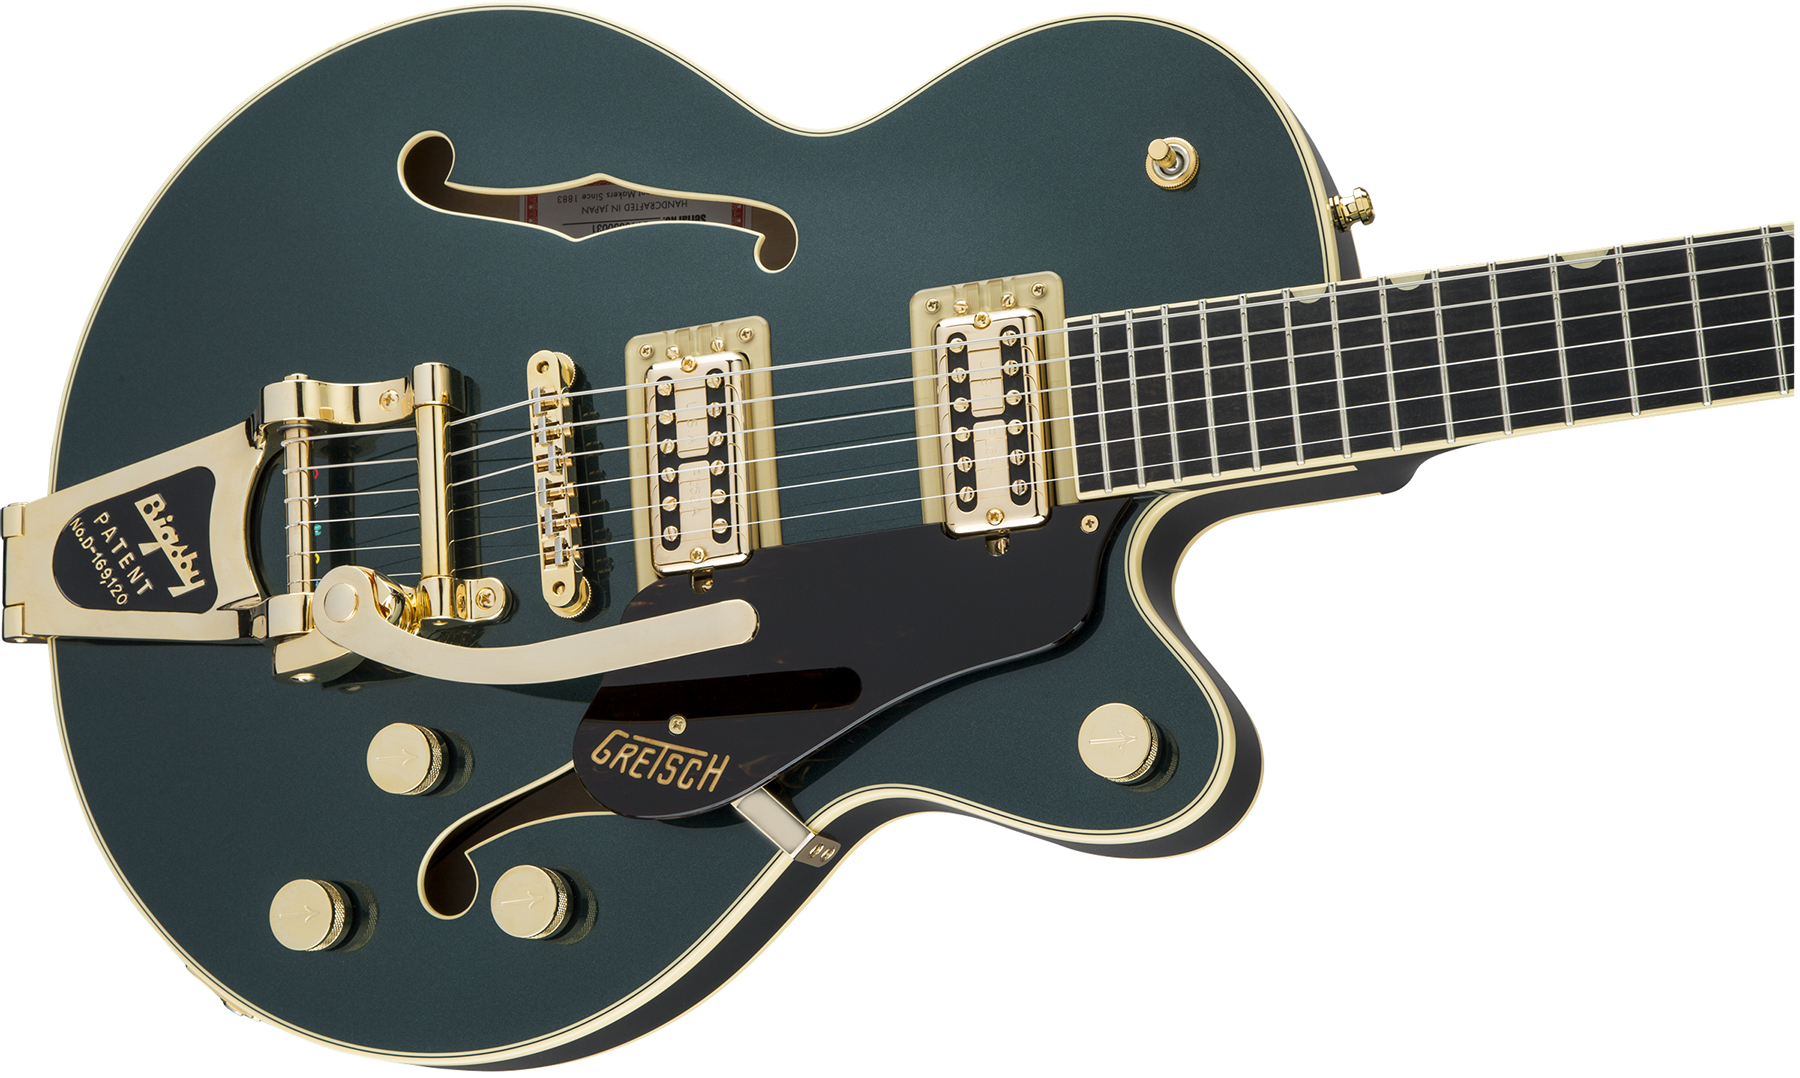 Gretsch G6659tg Broadkaster Jr Center Bloc Players Edition Bigsby Pro Jap 2h Trem Eb - Cadillac Green - Semi-hollow electric guitar - Variation 2